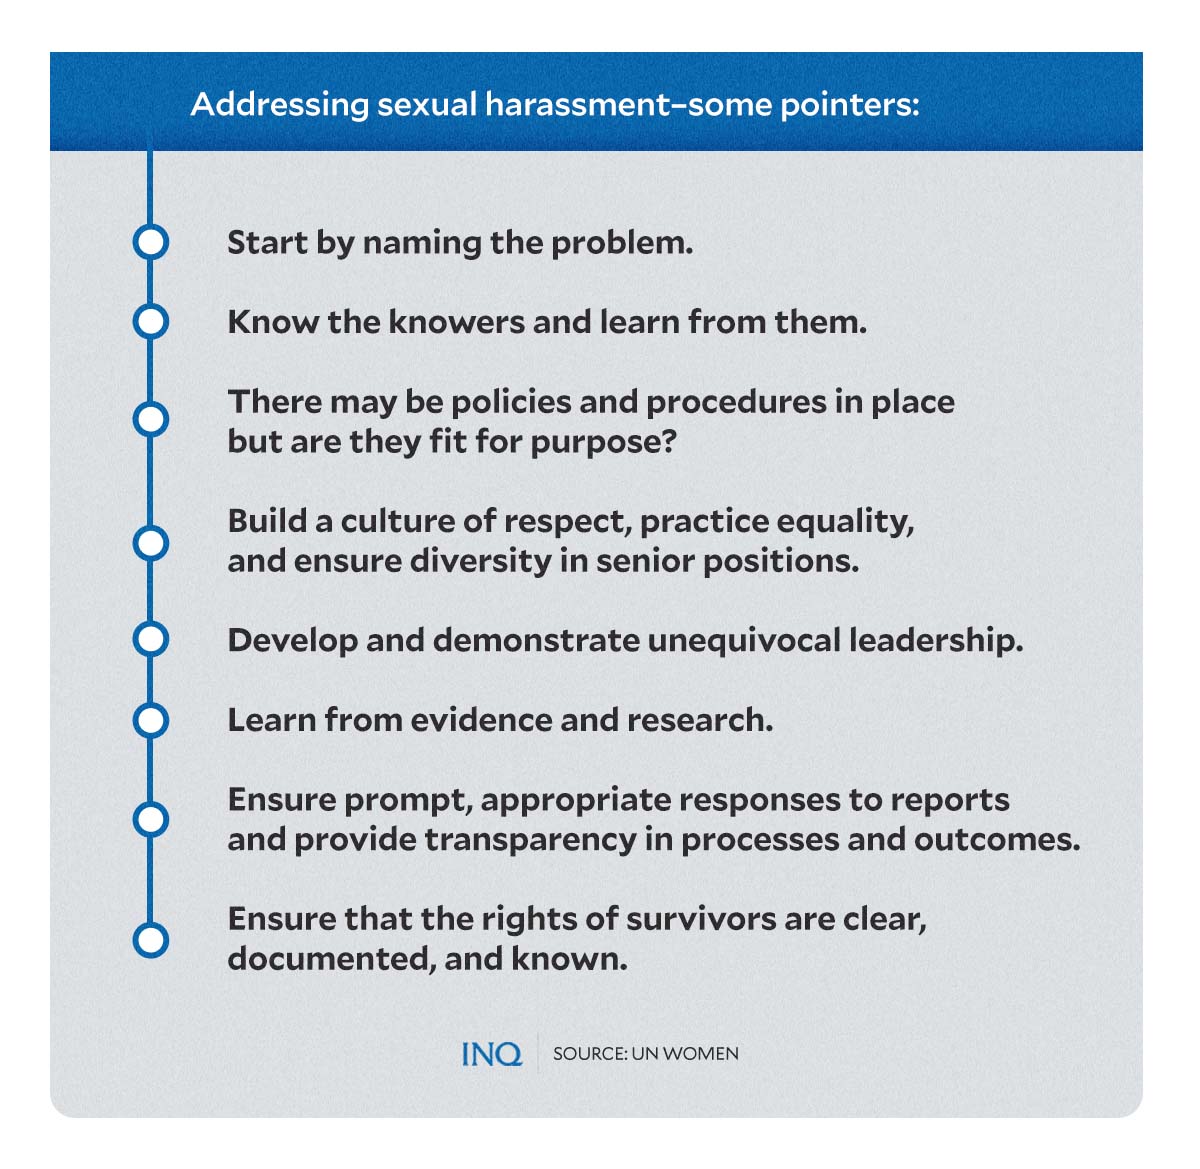 Addressing sexual harassment - some pointers